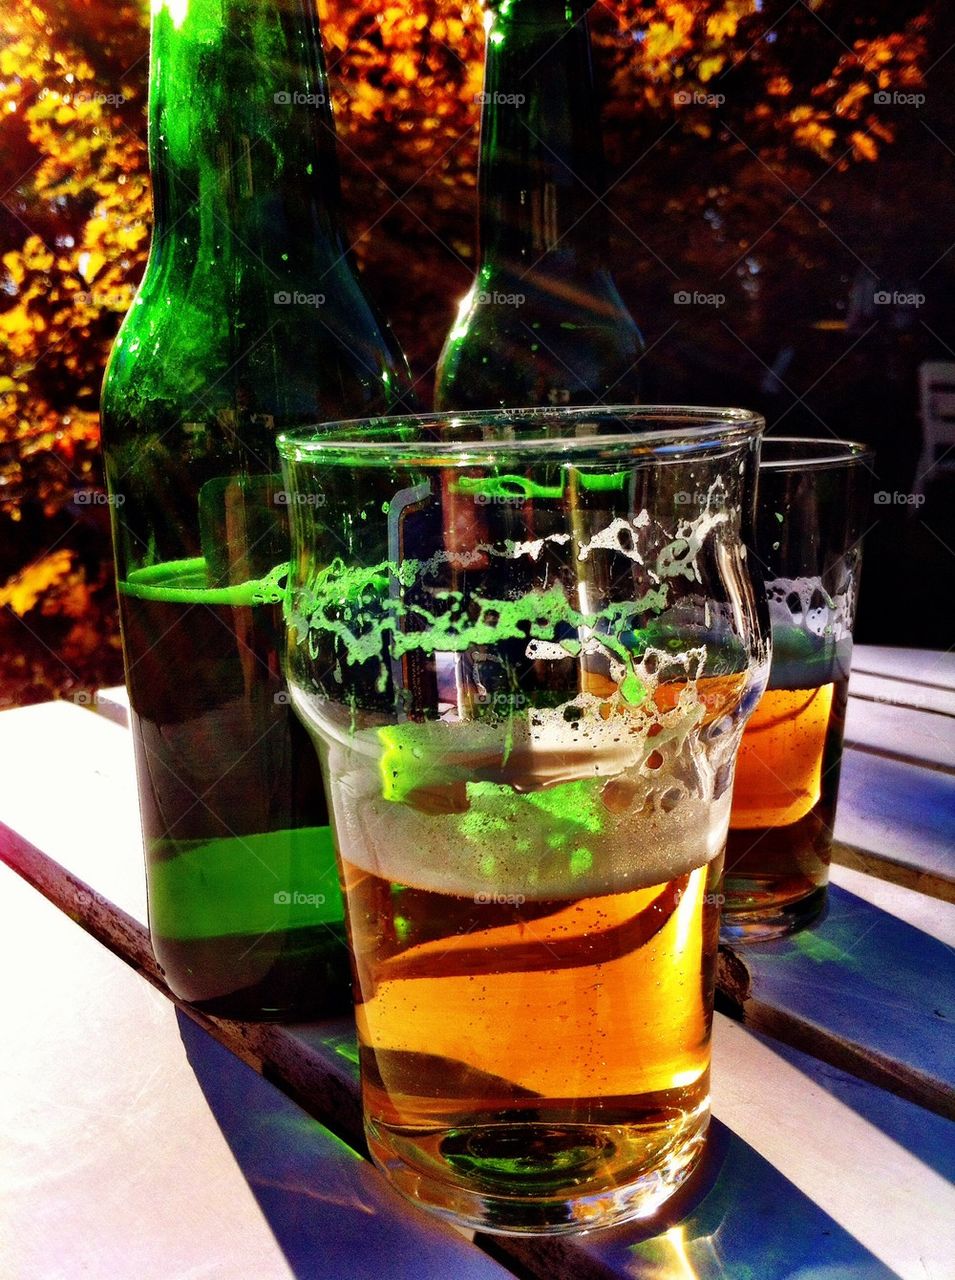 Glasses of beer and bottles outdoors in fall.